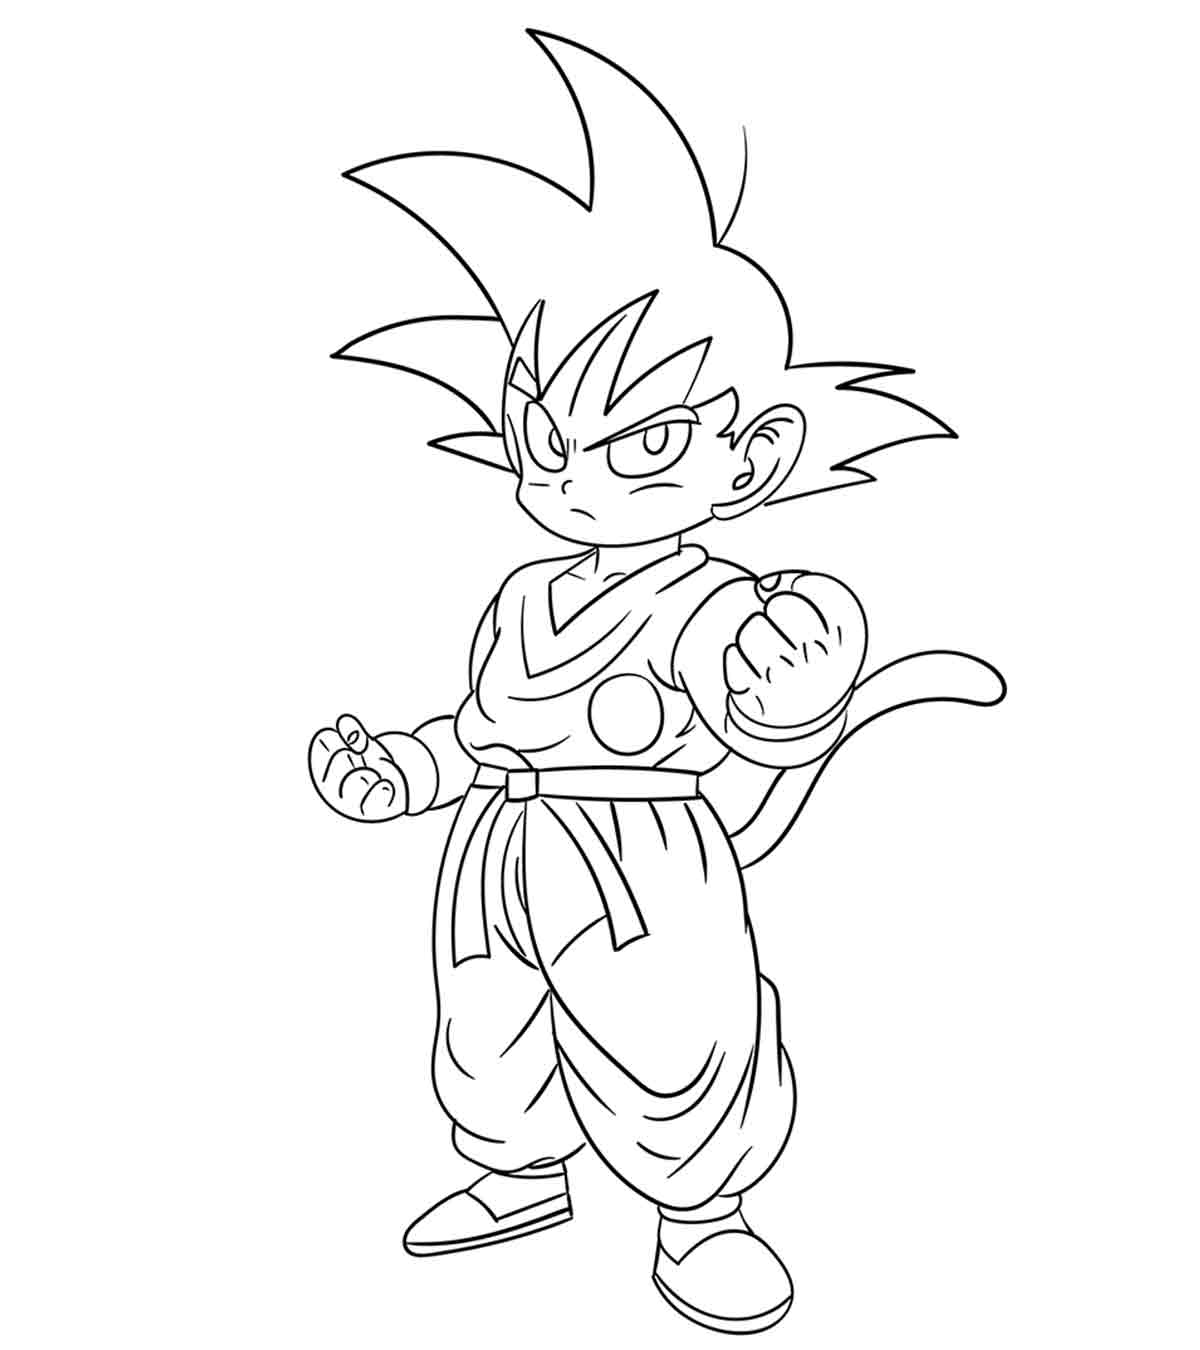 Coloring ~ 1999553 Dragon Ball Z Coloring Pages Goku Kamehameha With Dragon  Bardock Dbz Pictures Online Free Fantastic Dbz Coloring Photo Inspirations.  Dbz Coloring Online. Dbz Coloring Pics For Girls. Dbz Coloring